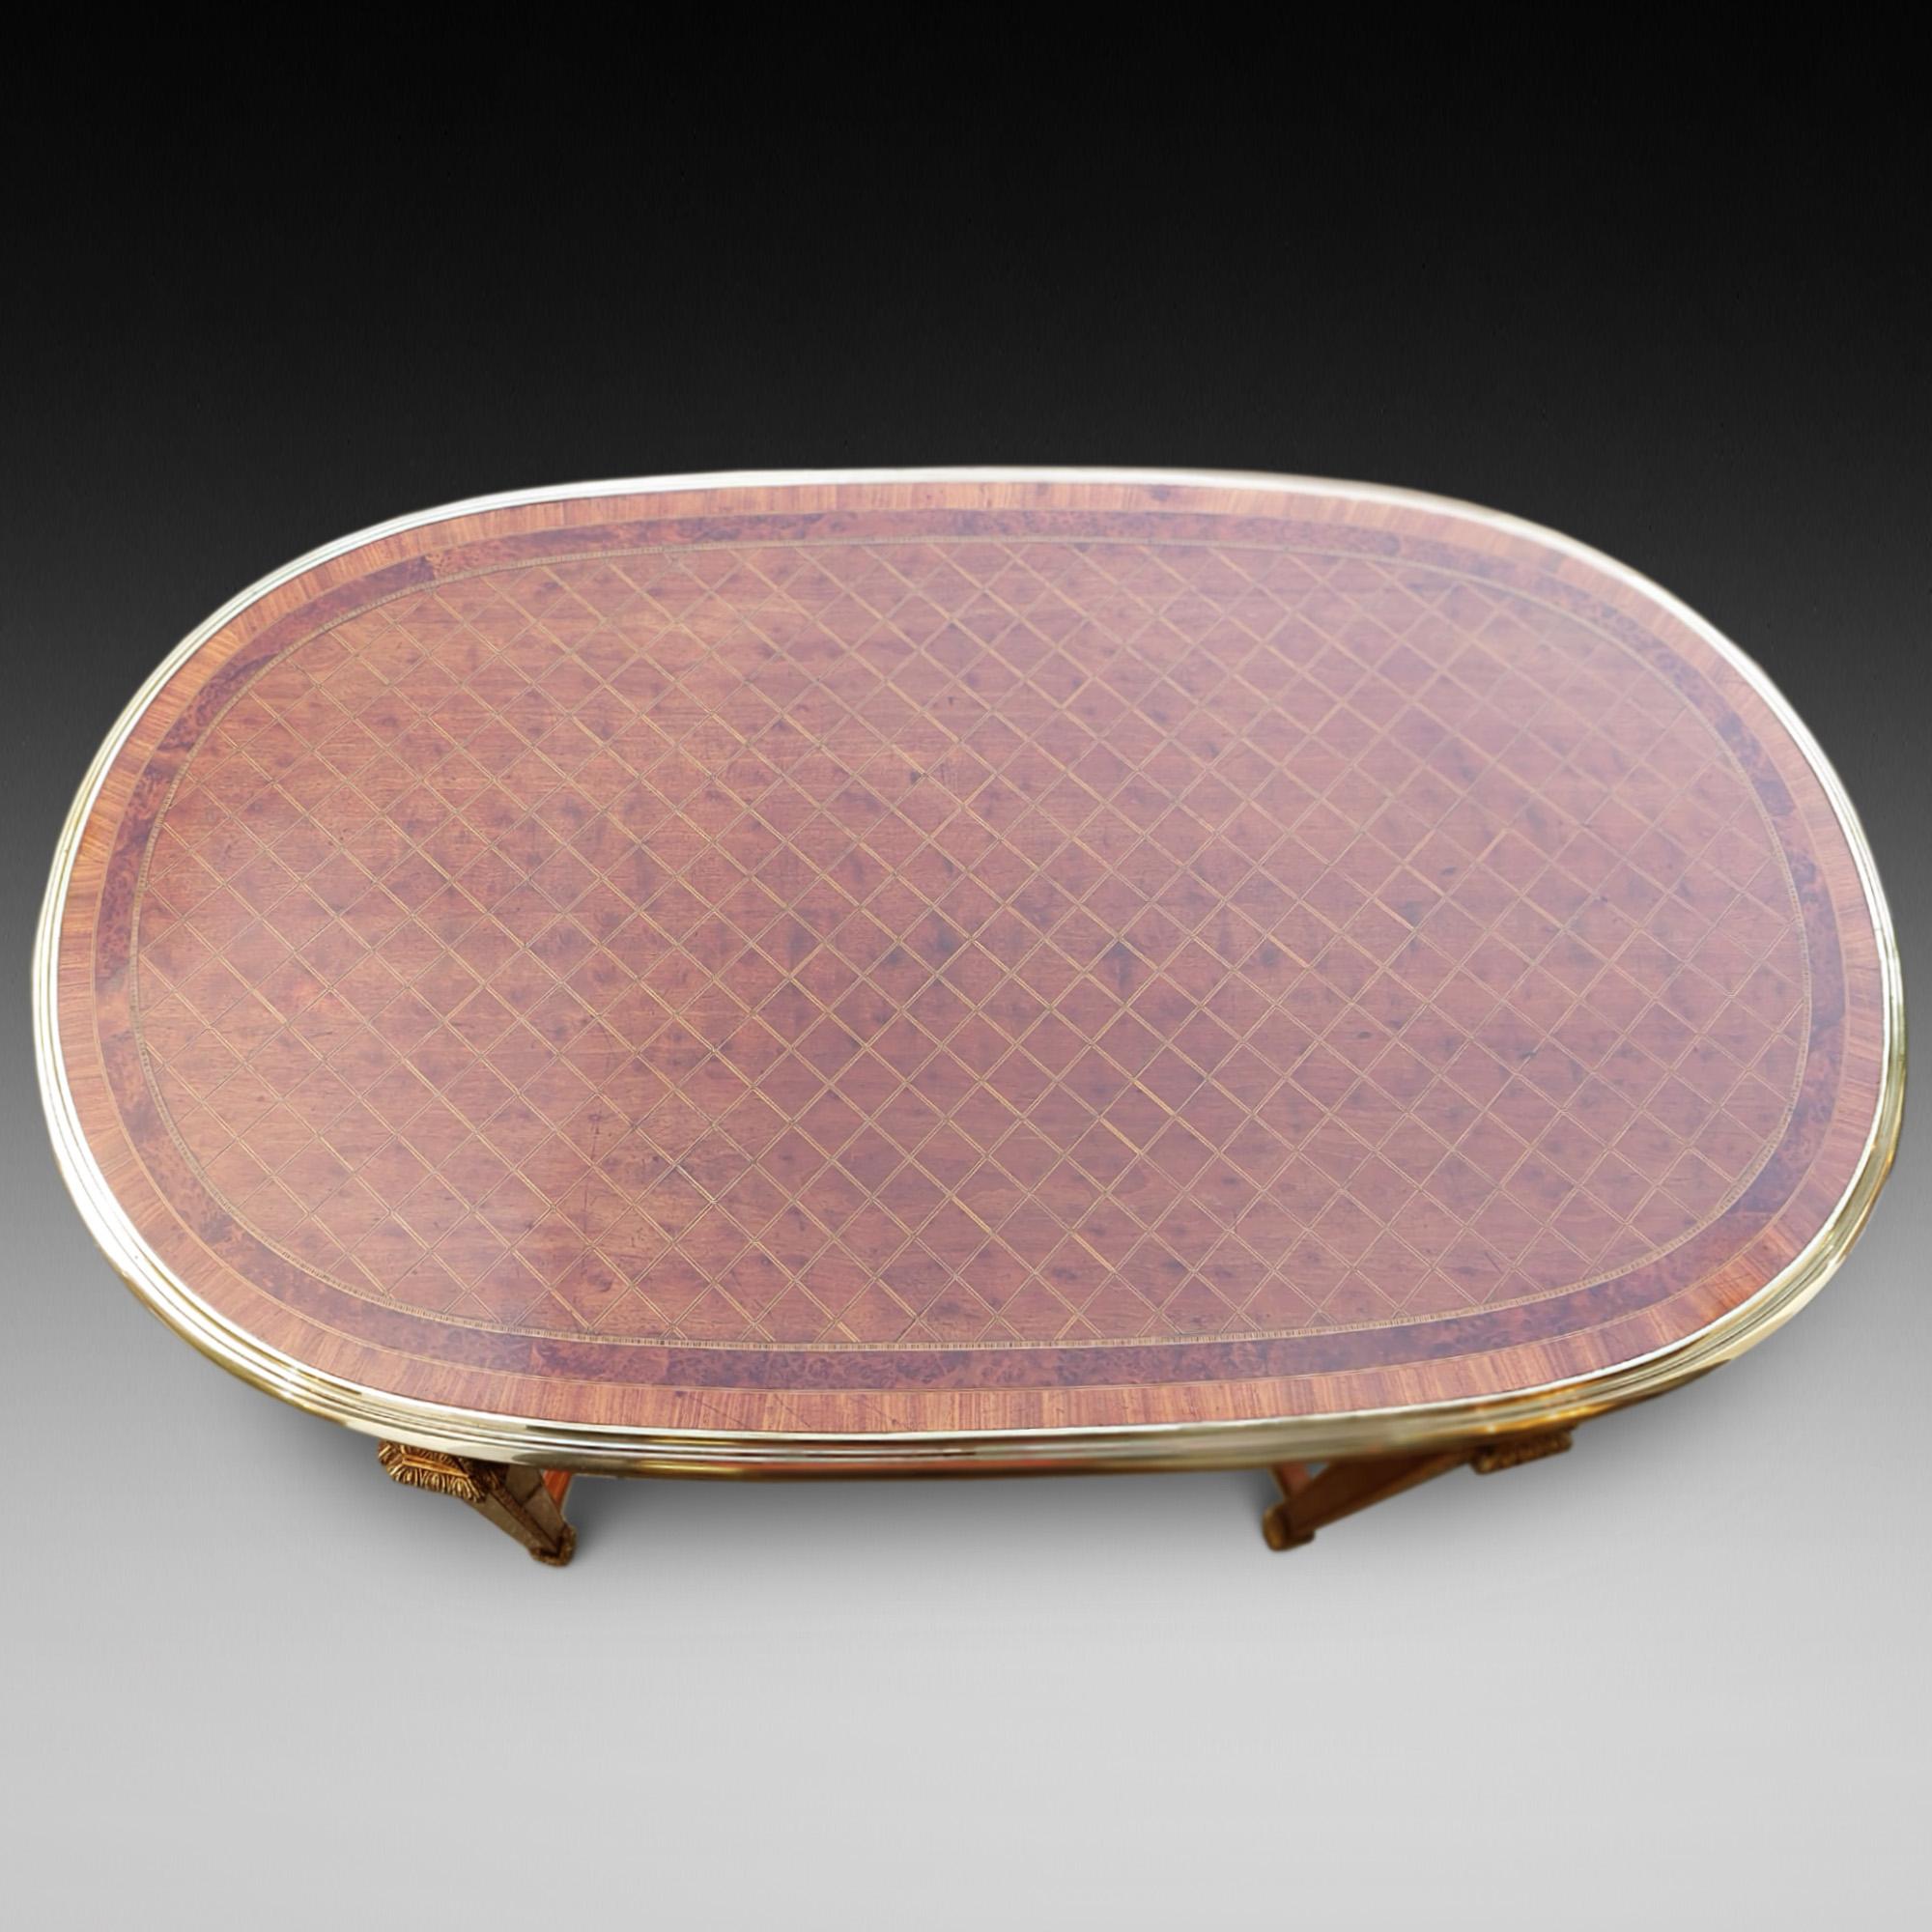 Loius XVI Style Inlaid Centre Table the brass banded top with amboyna and rosewood crossbanding and diamond inlay, curved X-Stretcher and the base decorated with ormalu - English c1860 - 47